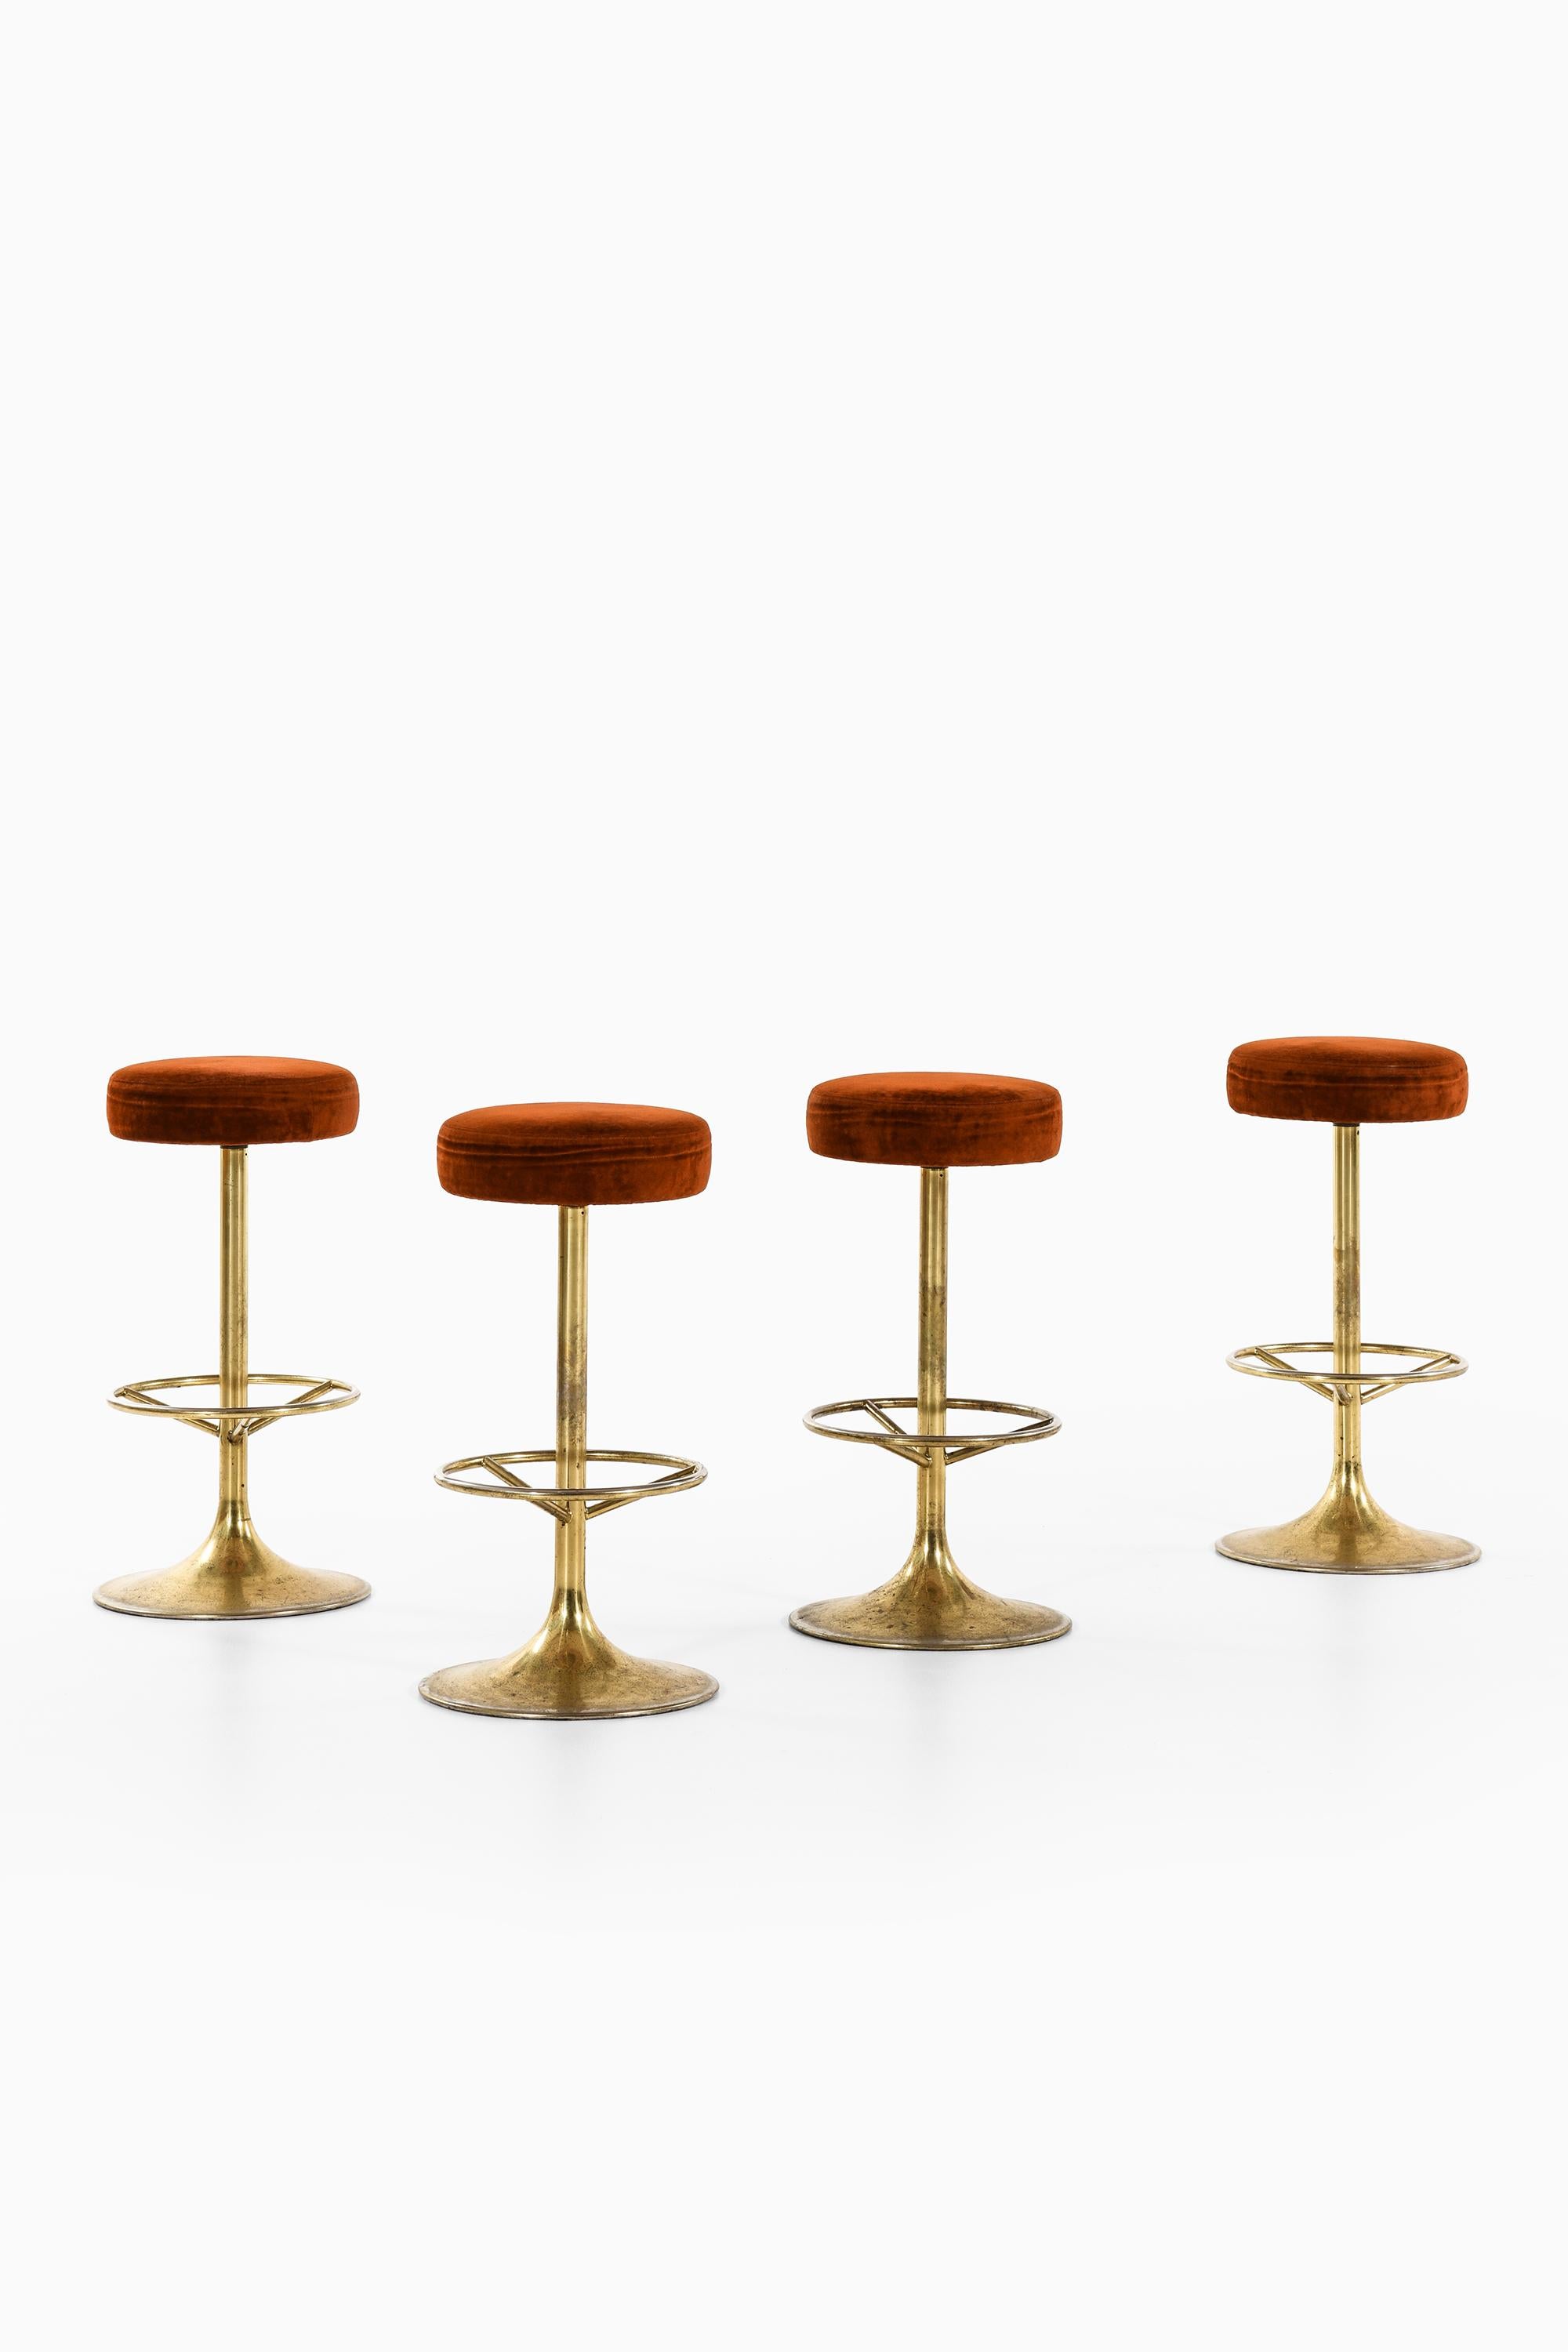 Set of 4 bar stools for Kathryn